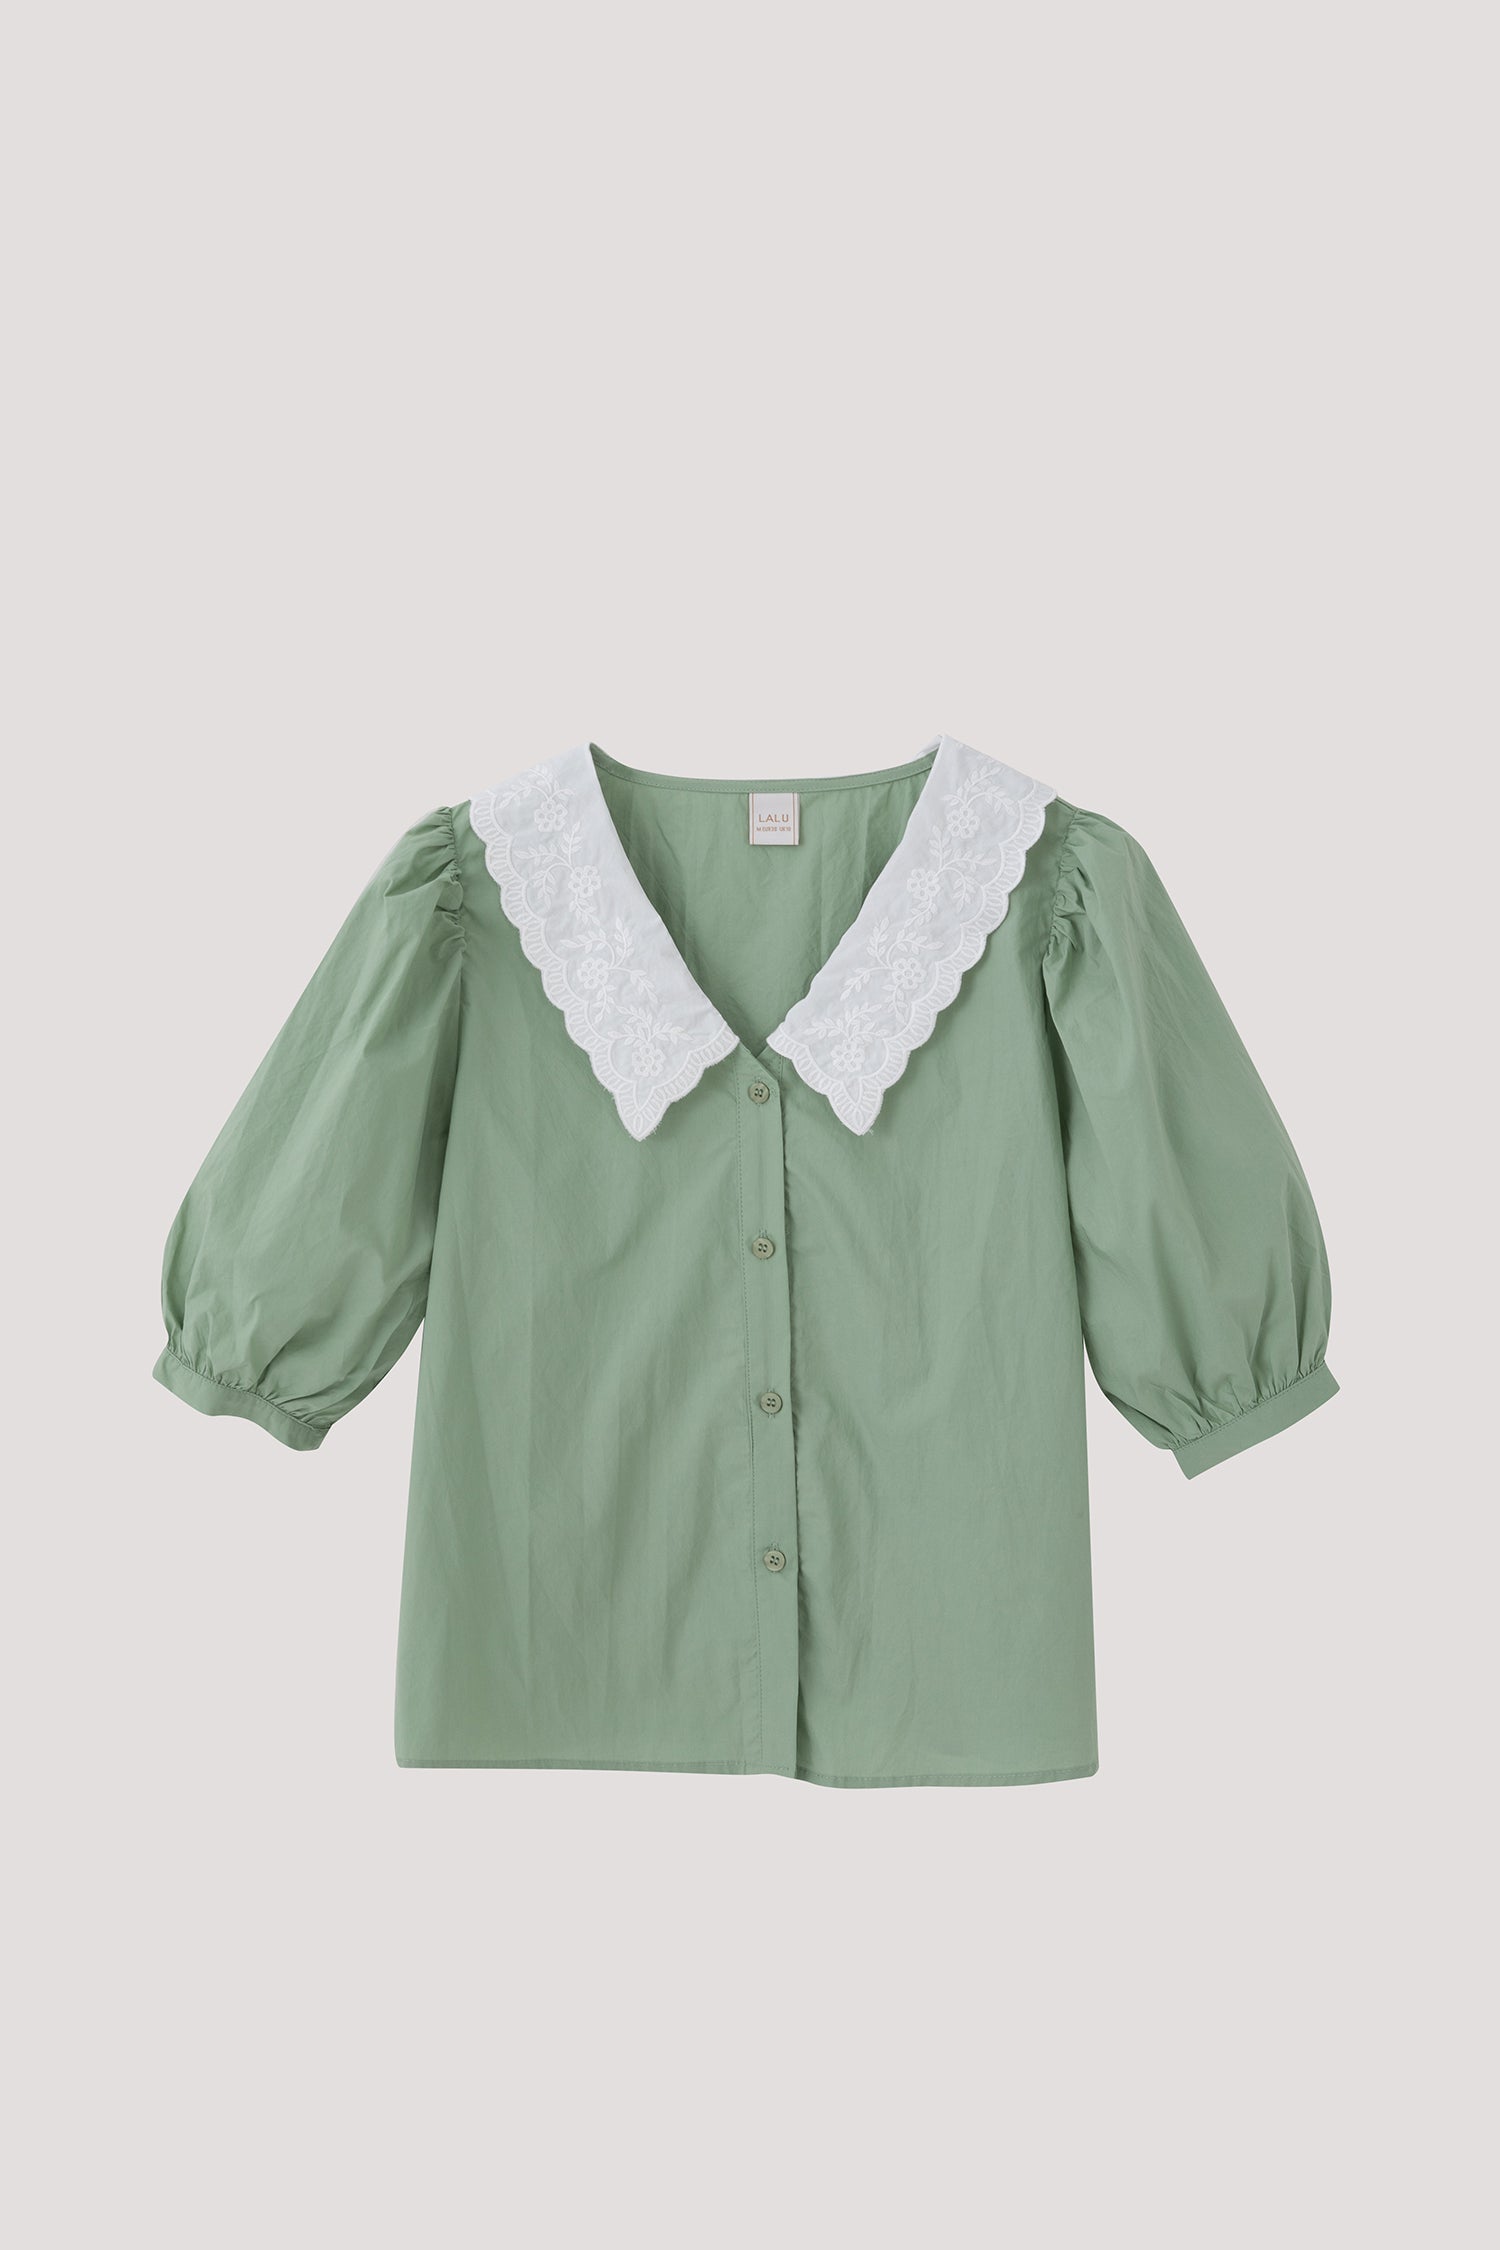 Lace Collar Button Up Blouse